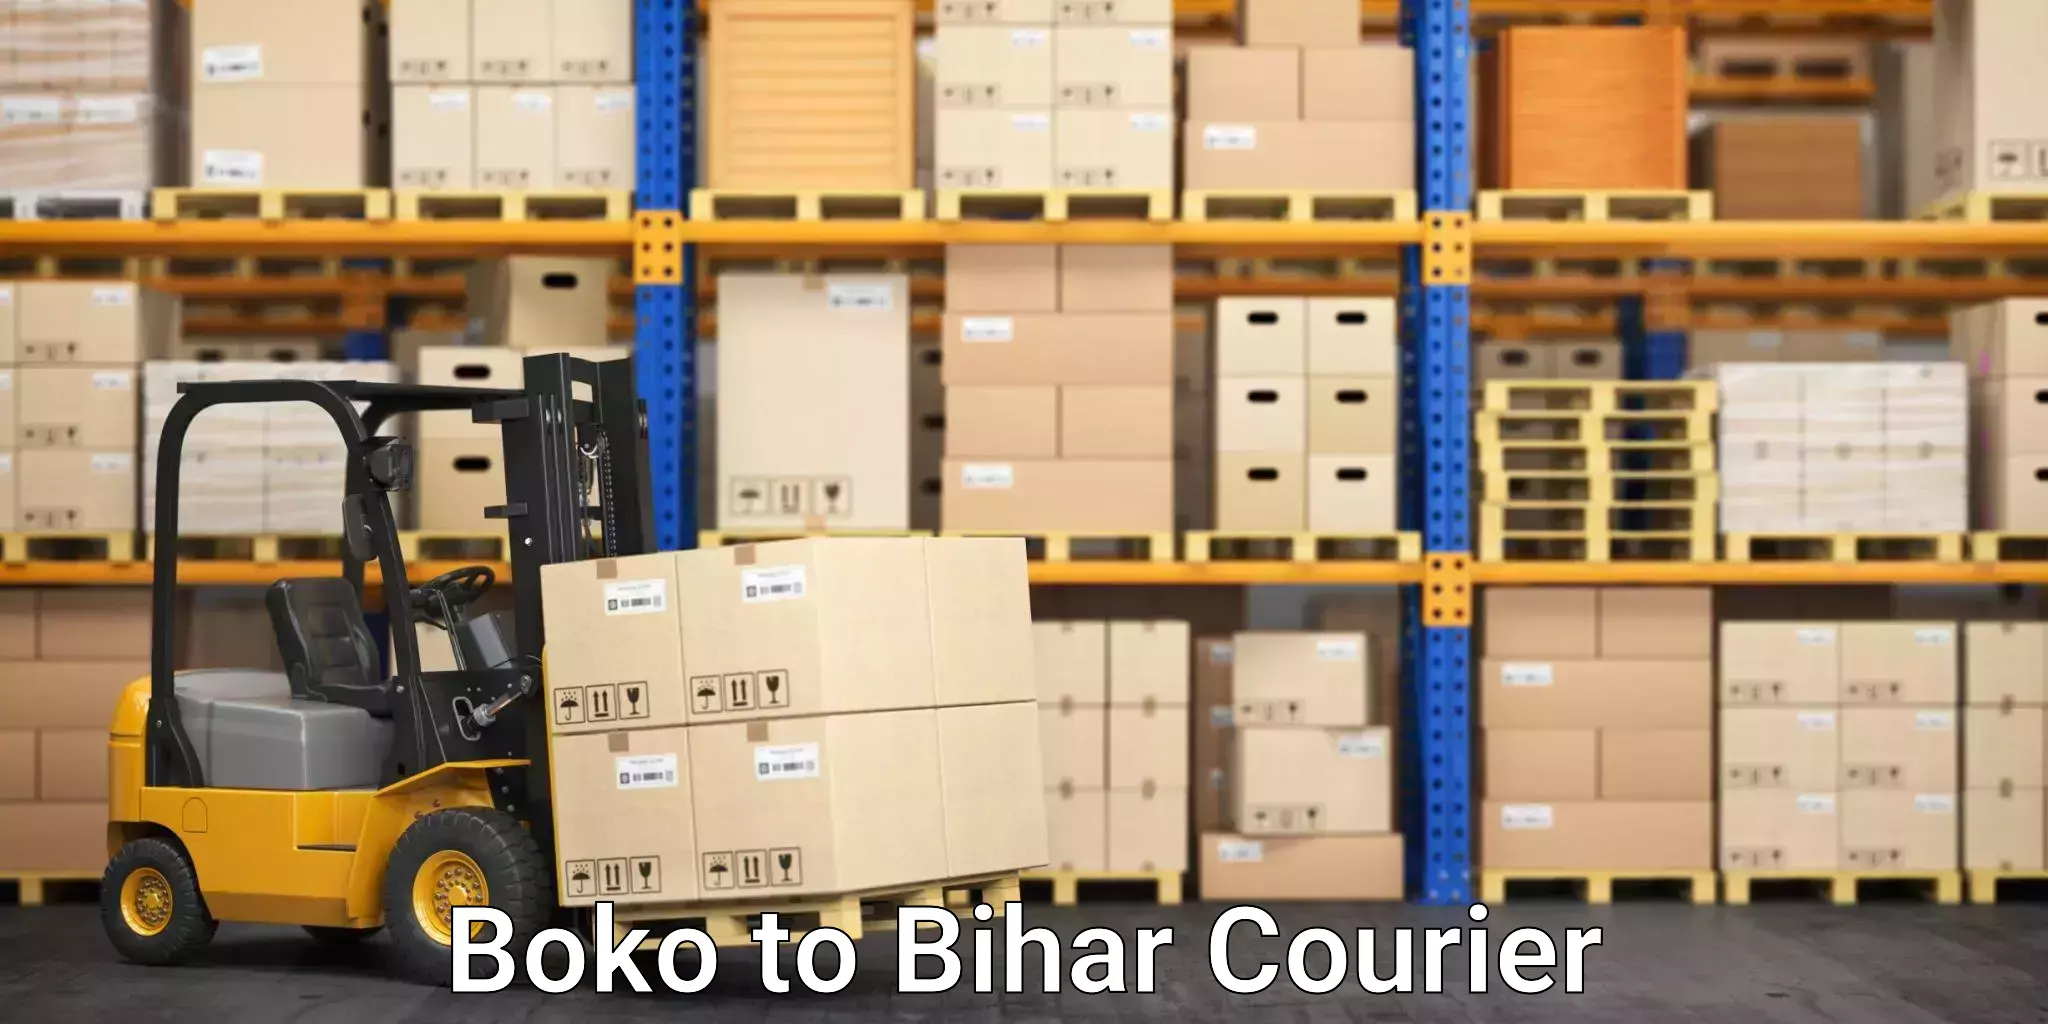 Efficient package consolidation Boko to Bihar